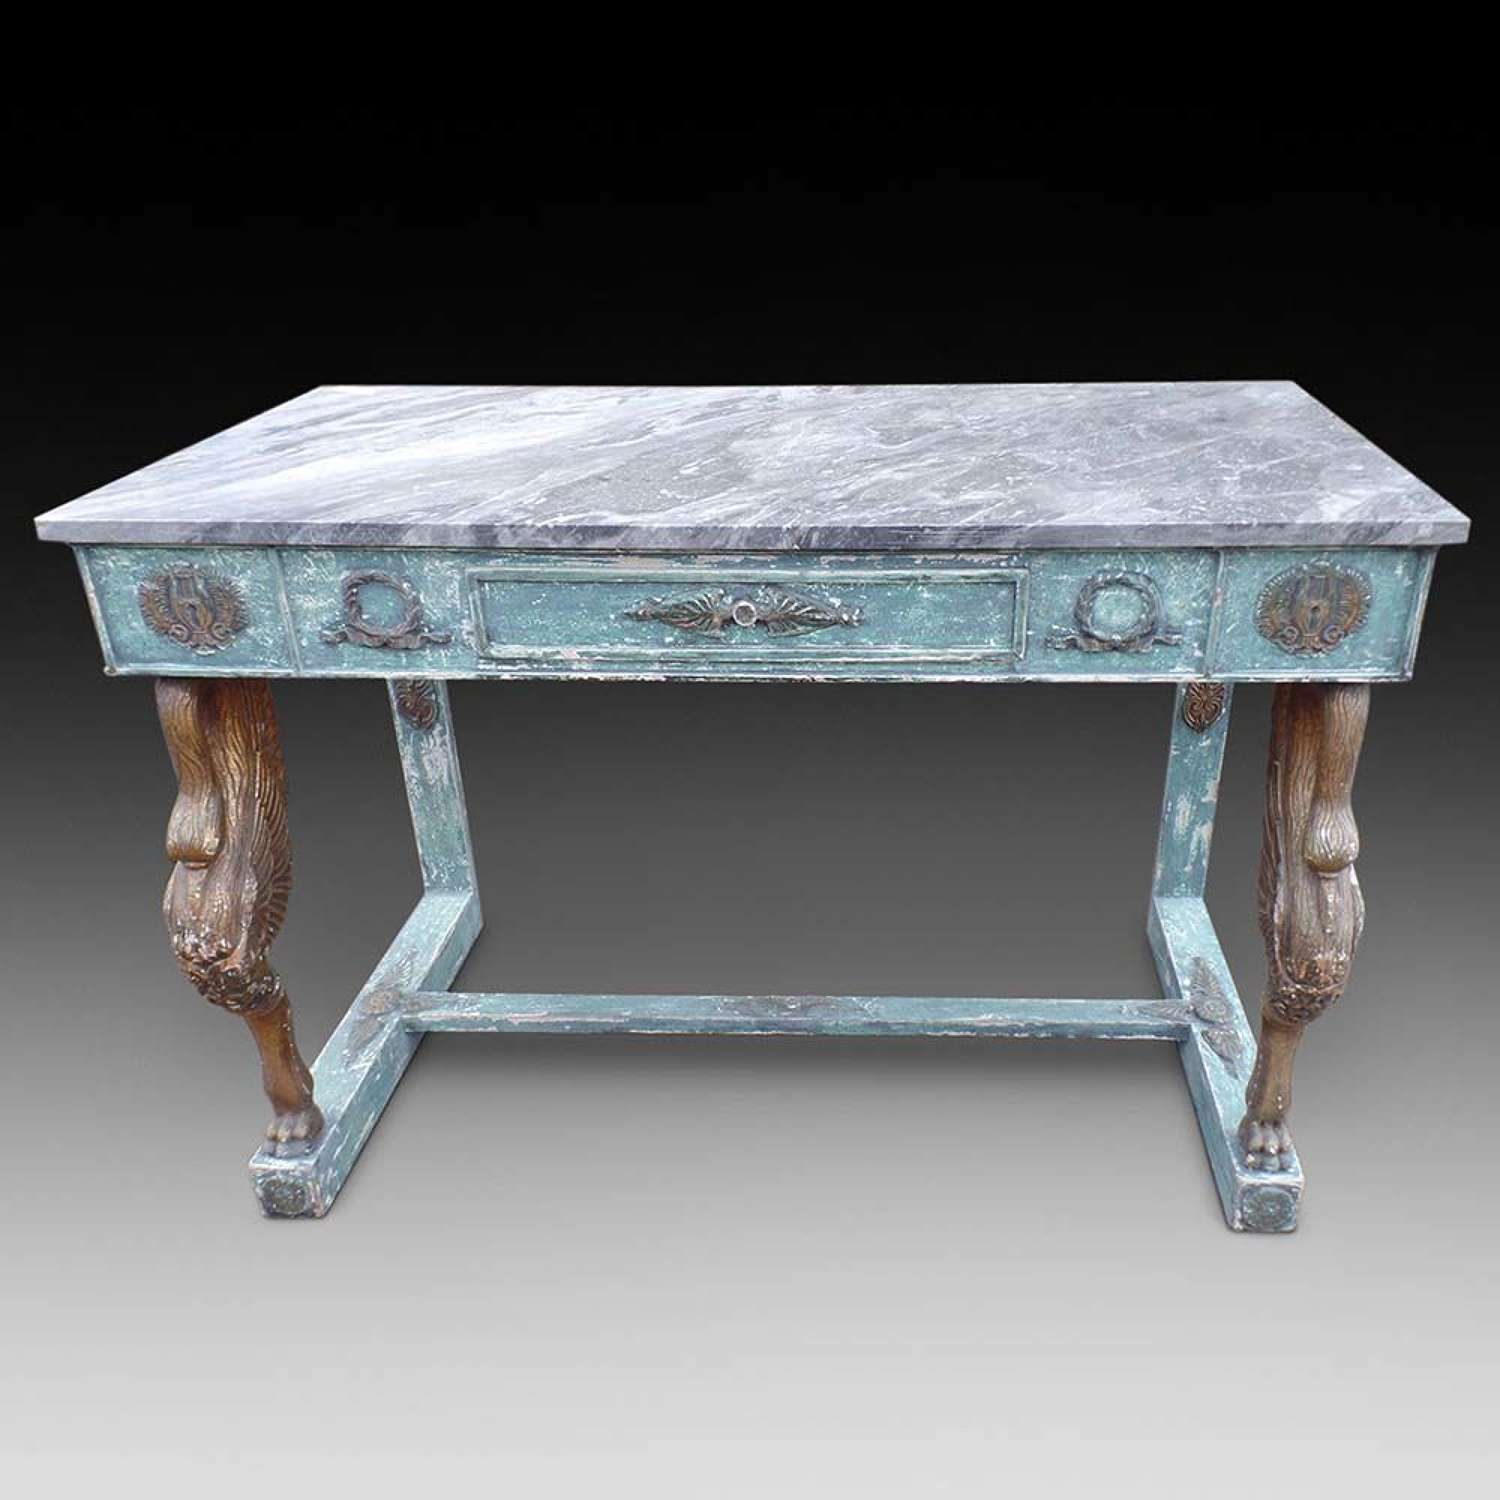 Italian Dry Stripped Console Table c.1850